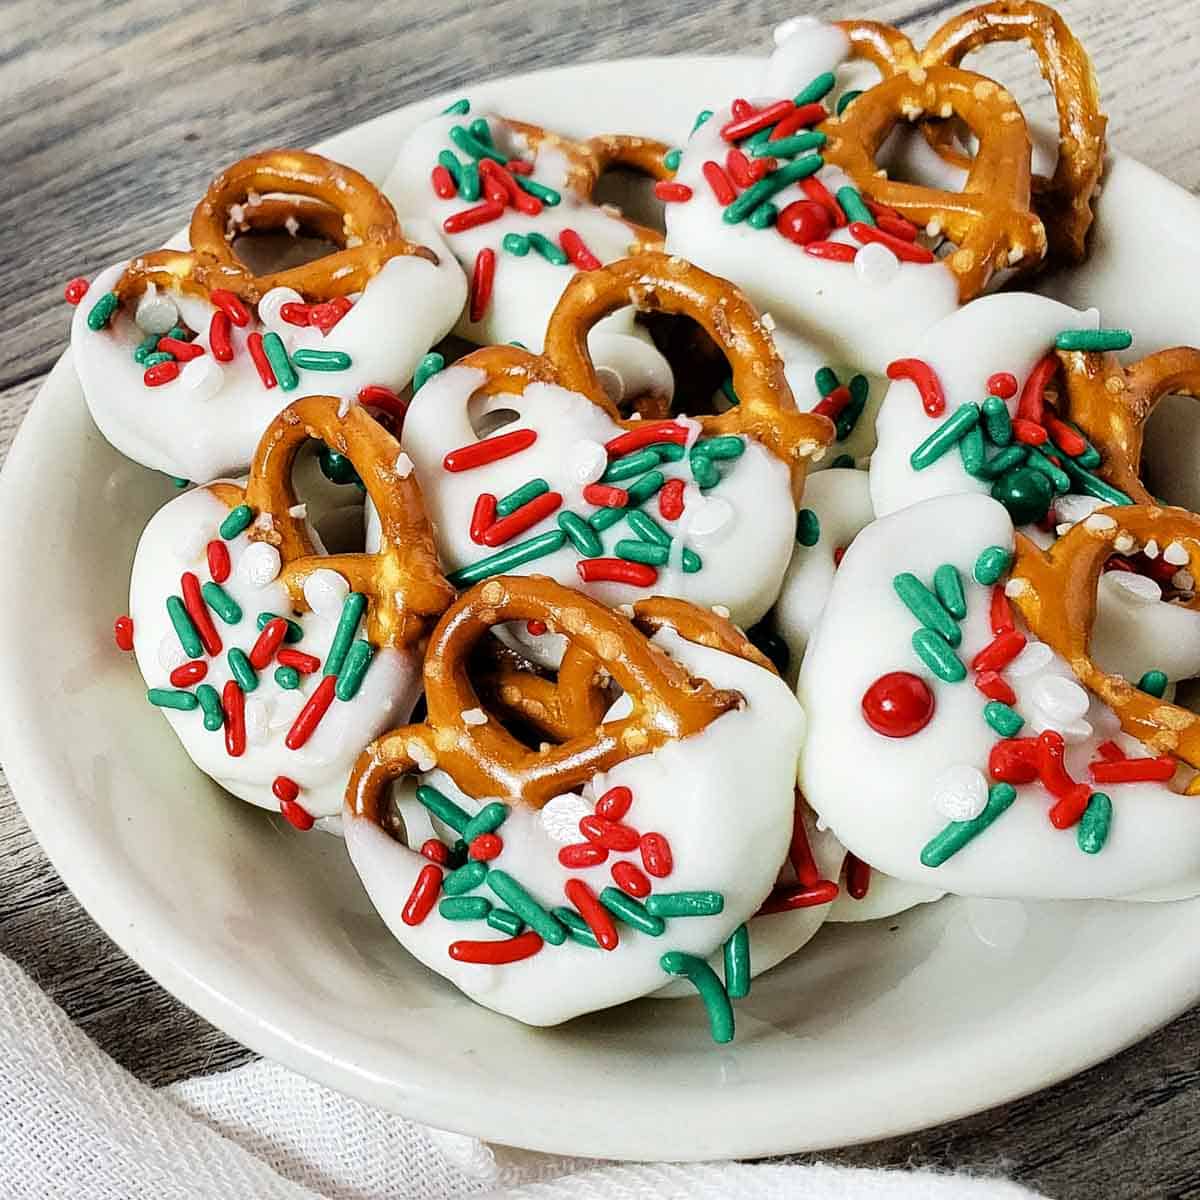 Overhead view of Christmas pretzels on a white plate sitting on a weathered wooden table.